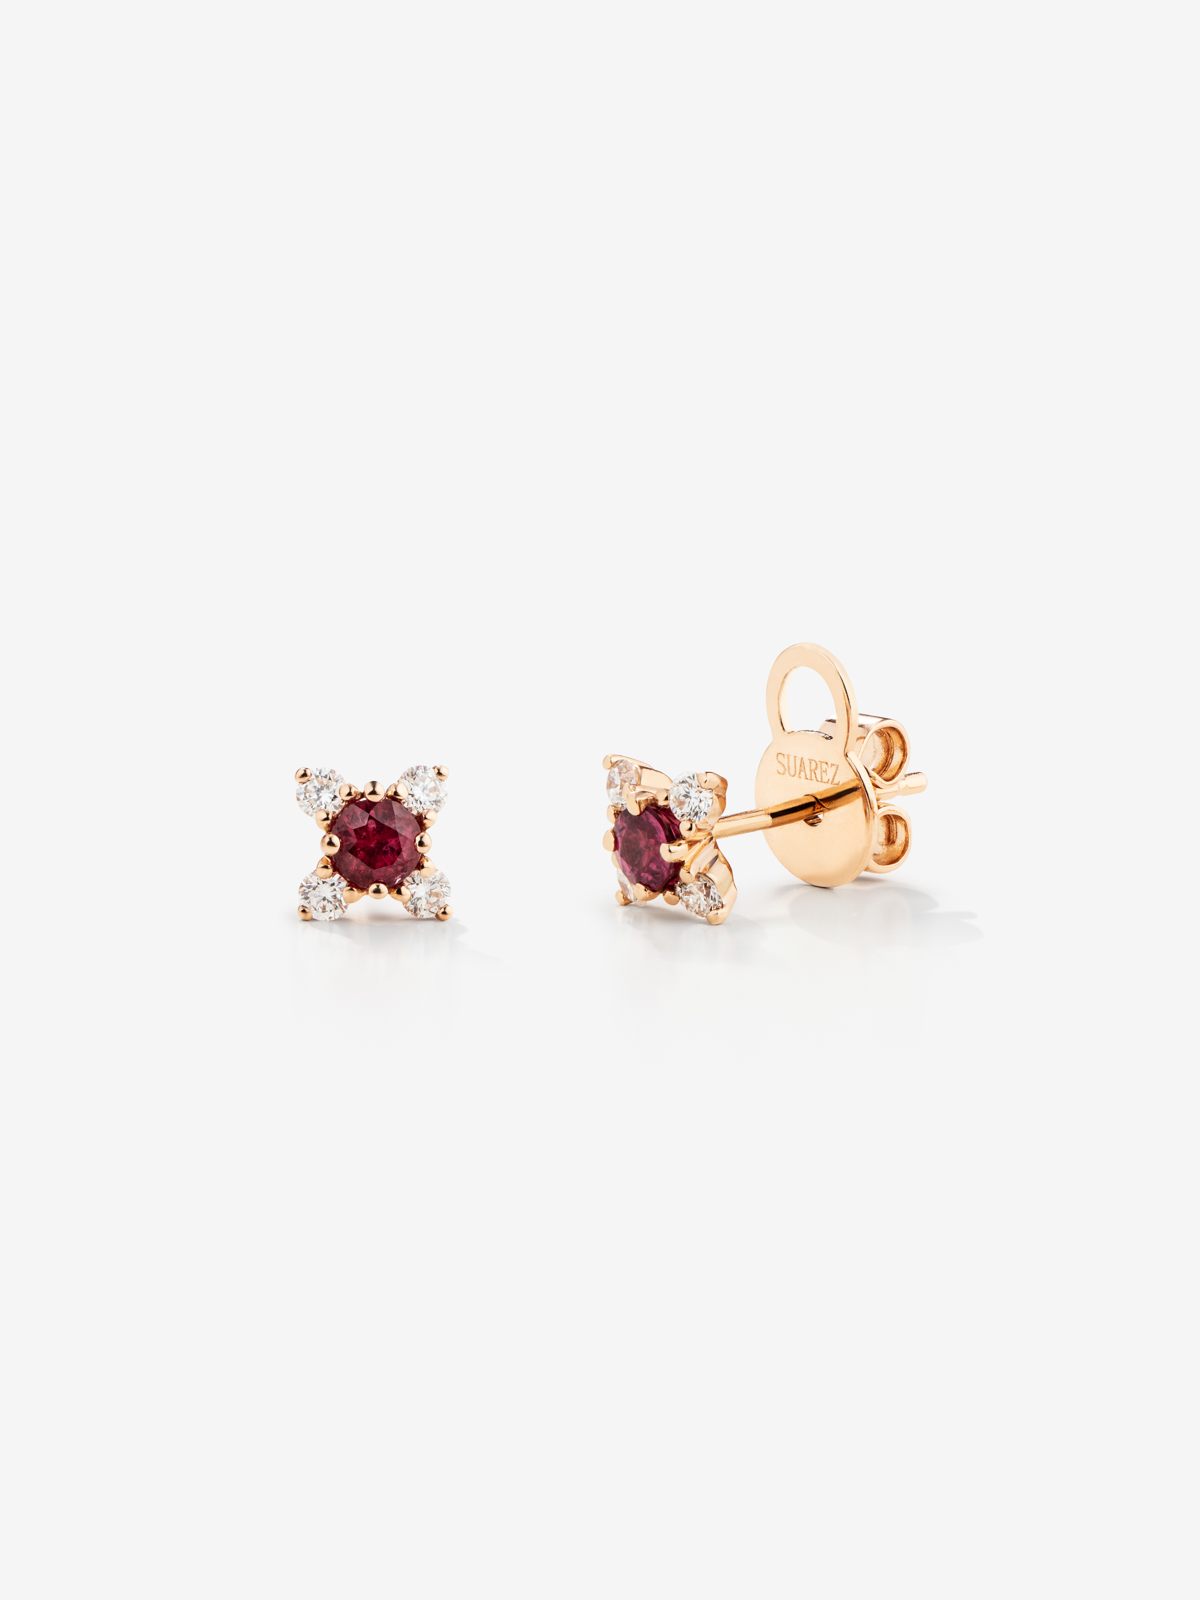 Individual 18K rose gold flower earring with ruby and diamonds.